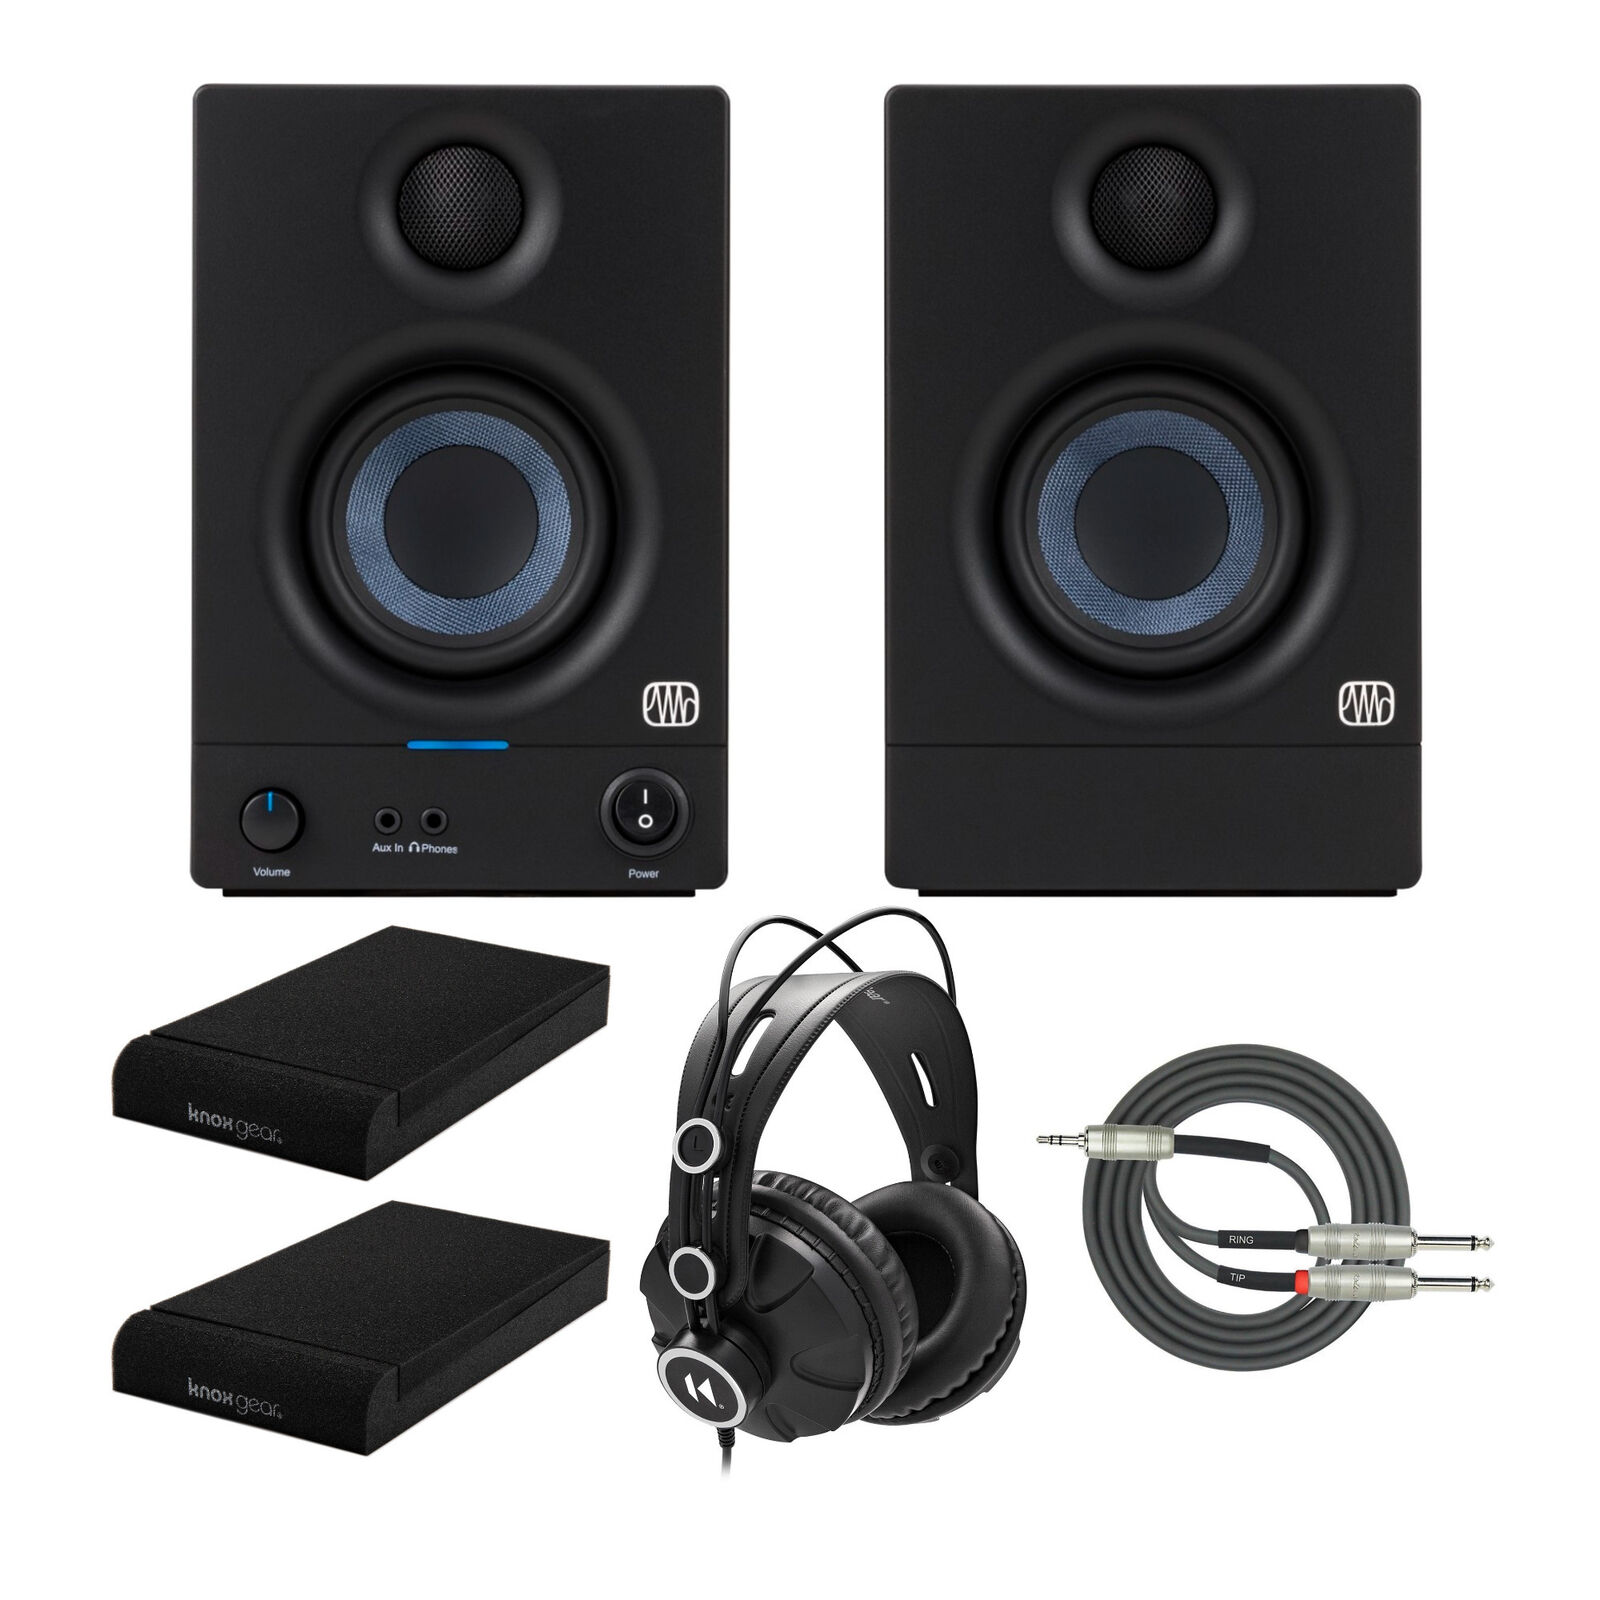 PreSonus Eris 3.5 3.5-In Monitor with Isolation Pads and Studio Headphone. Available Now for $139.99